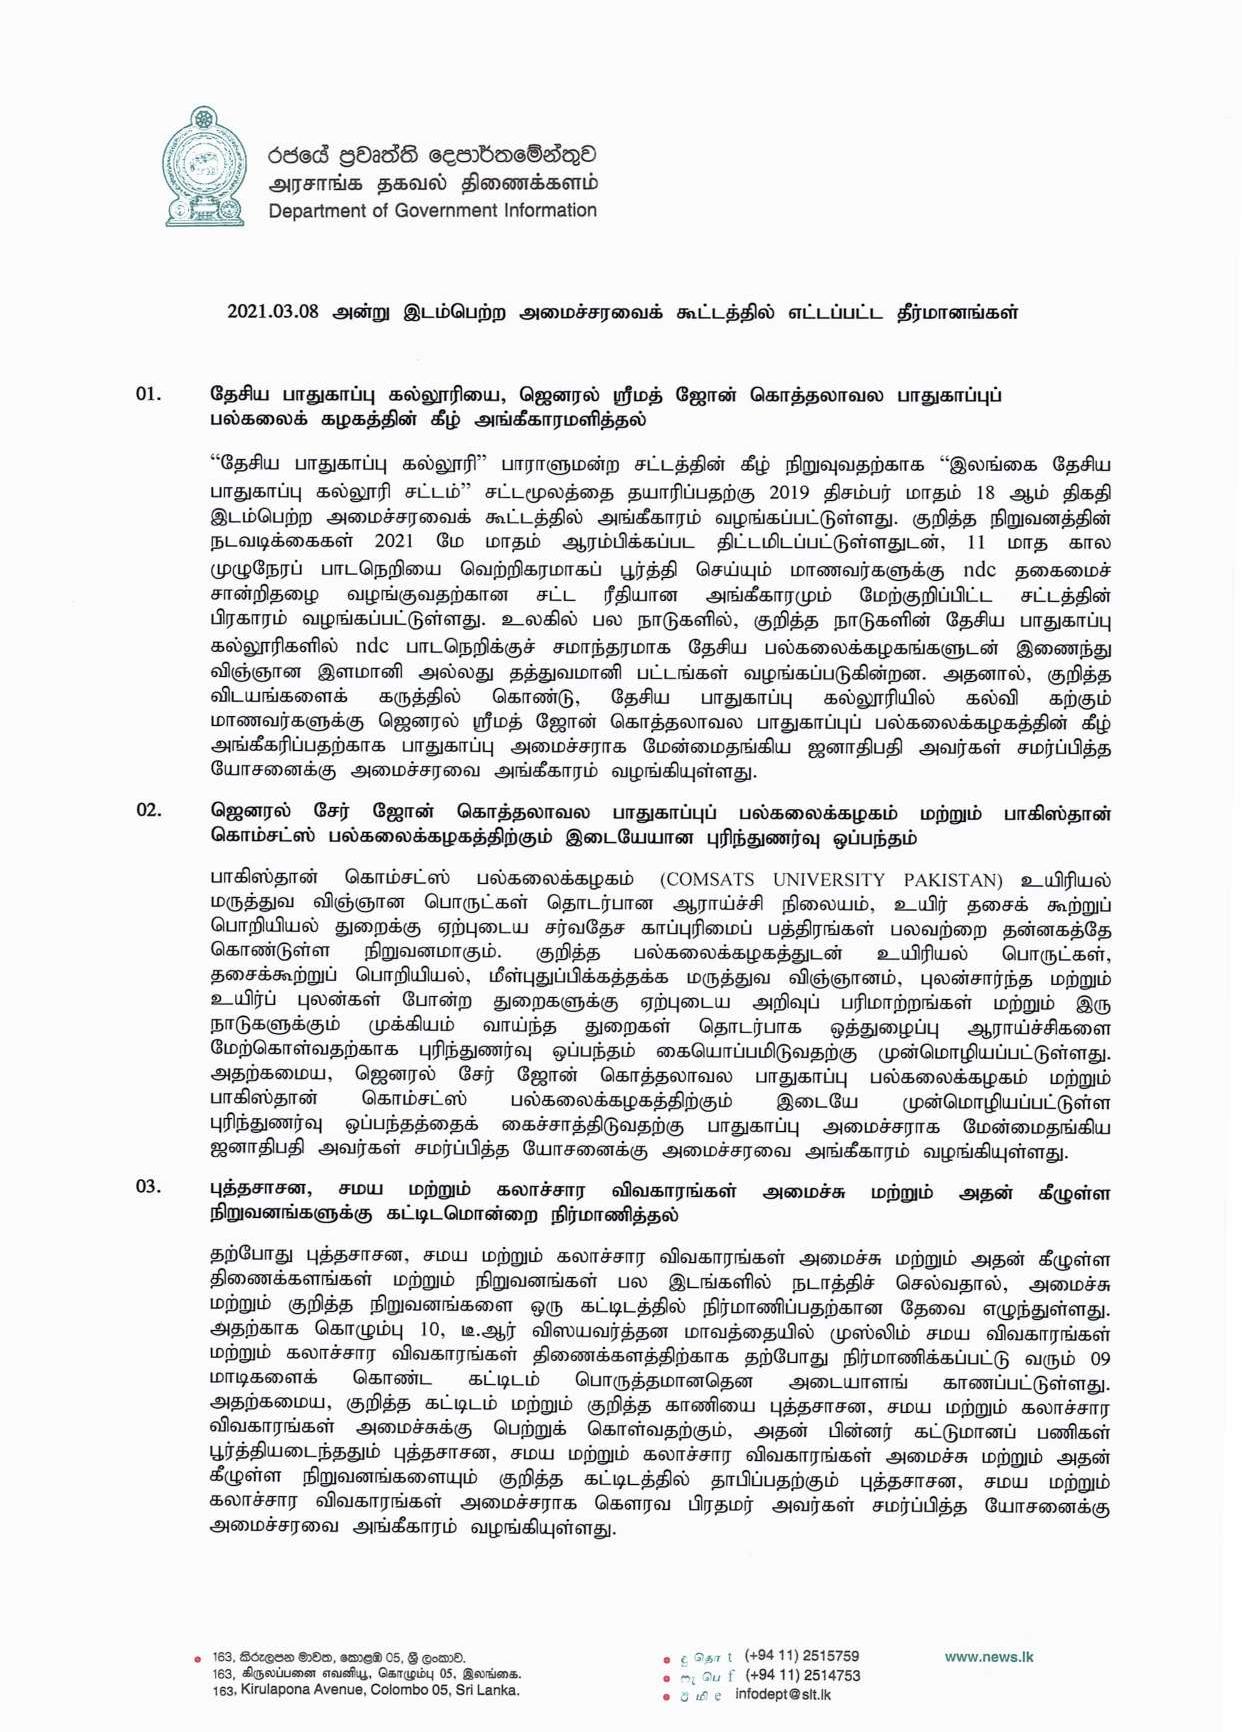 Cabinet Decision on 08.03.2021 Tamil page 001